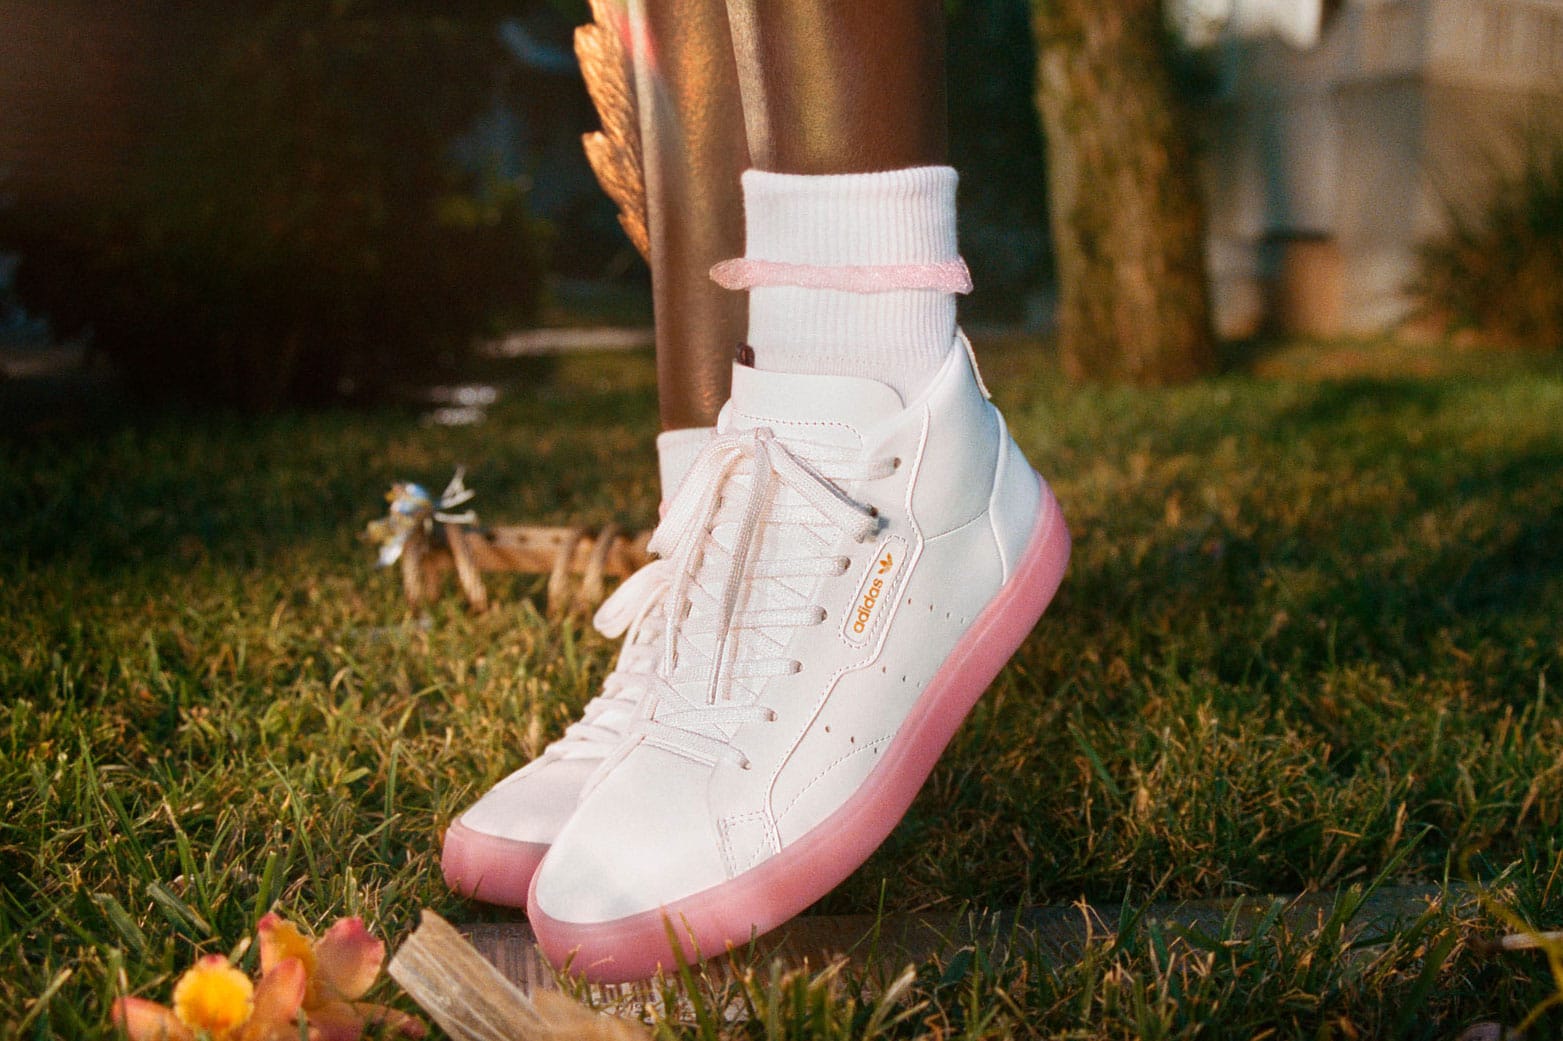 adidas originals sleek mid top trainer in white and pink